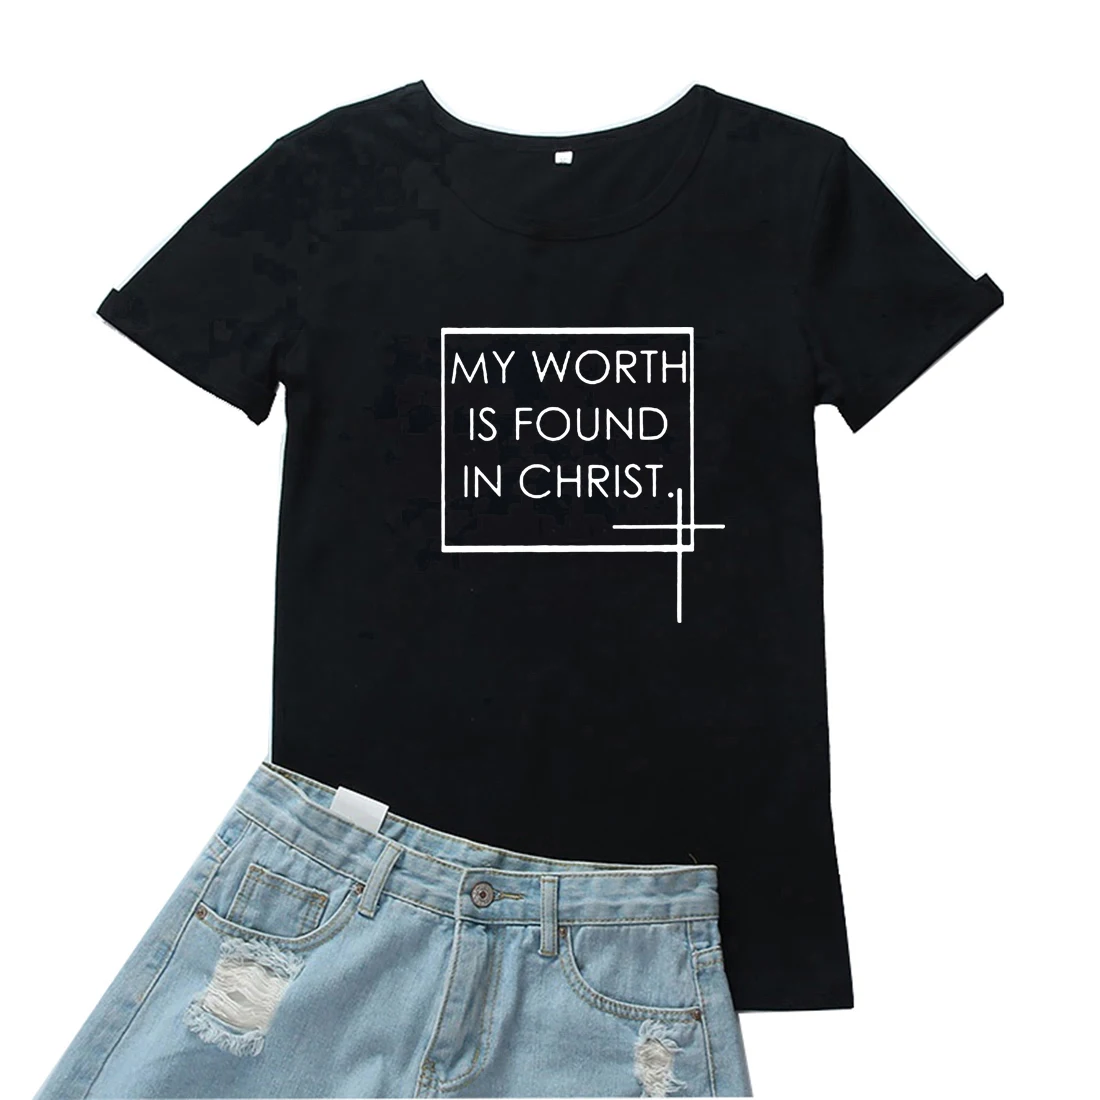 

My Worth Is Found In Christ Tshirt for Women Vintage Letter Pattern Mujer Camisetas Funny Saying Tees Women Fashion Women Tshirt